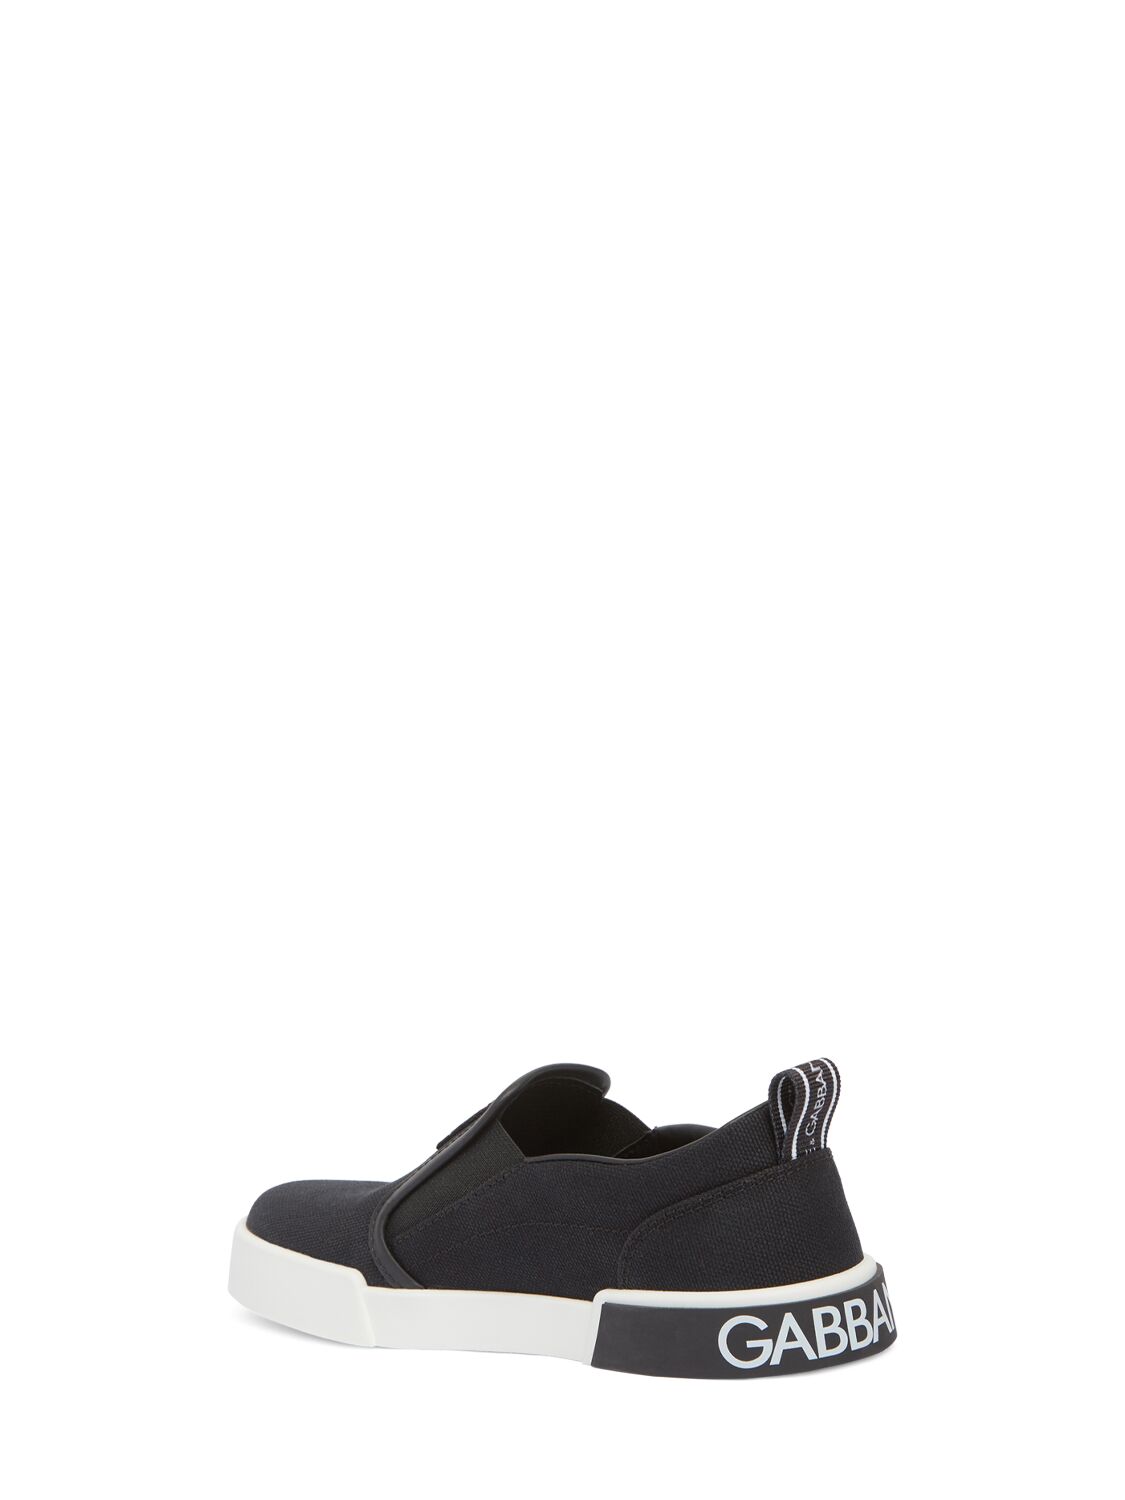 Shop Dolce & Gabbana Canvas & Leather Slip-on Sneakers In Black